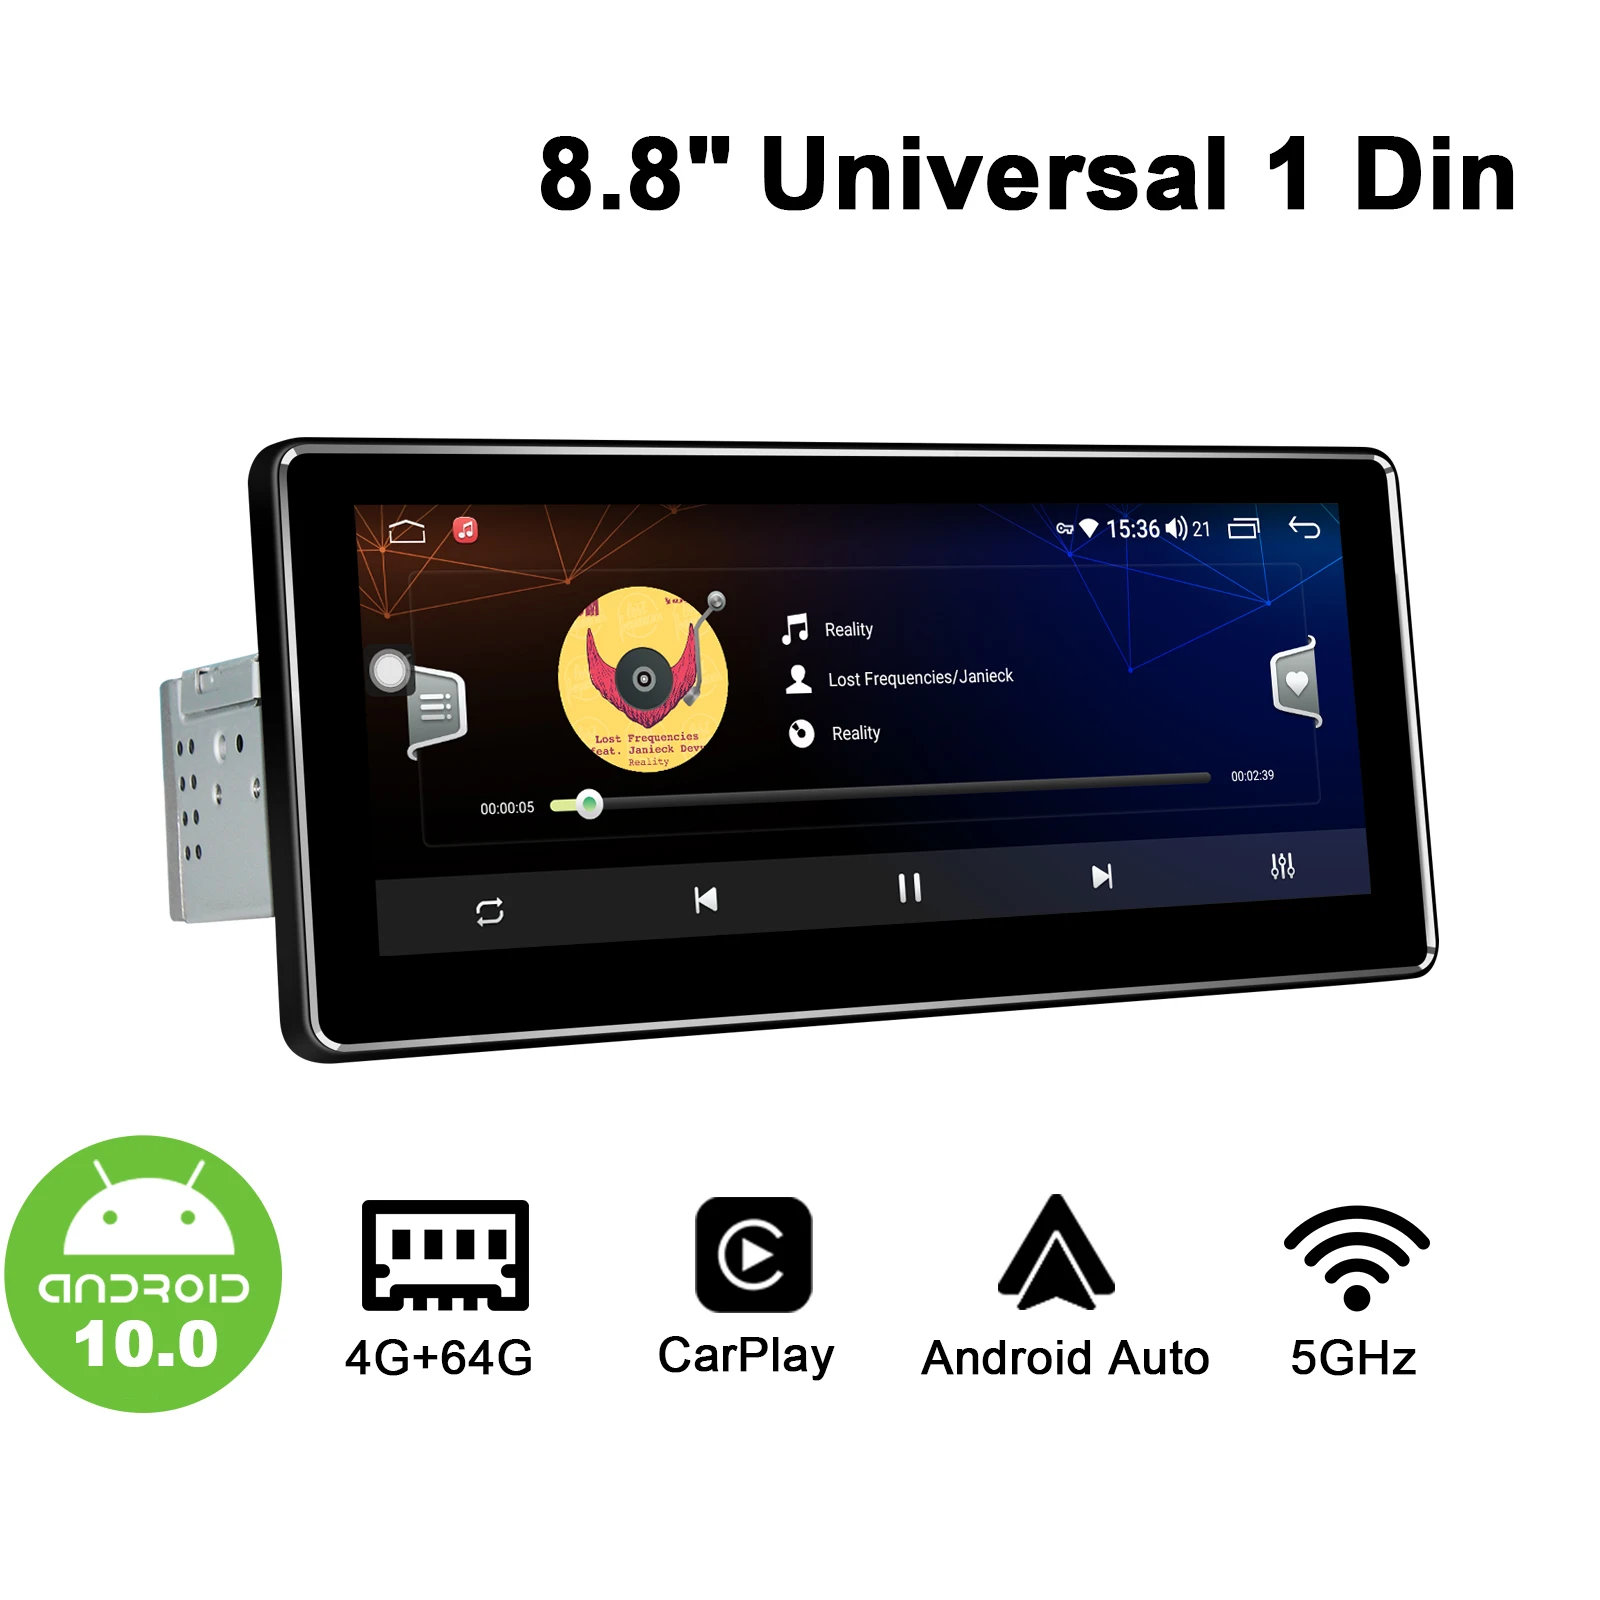 Android 10.0 Car 1din 8.8"ips Octa C Ore1280*480 Rds Fm Support Carplay&android Auto&4g Universal Multimedia Video Player - Multimedia AliExpress